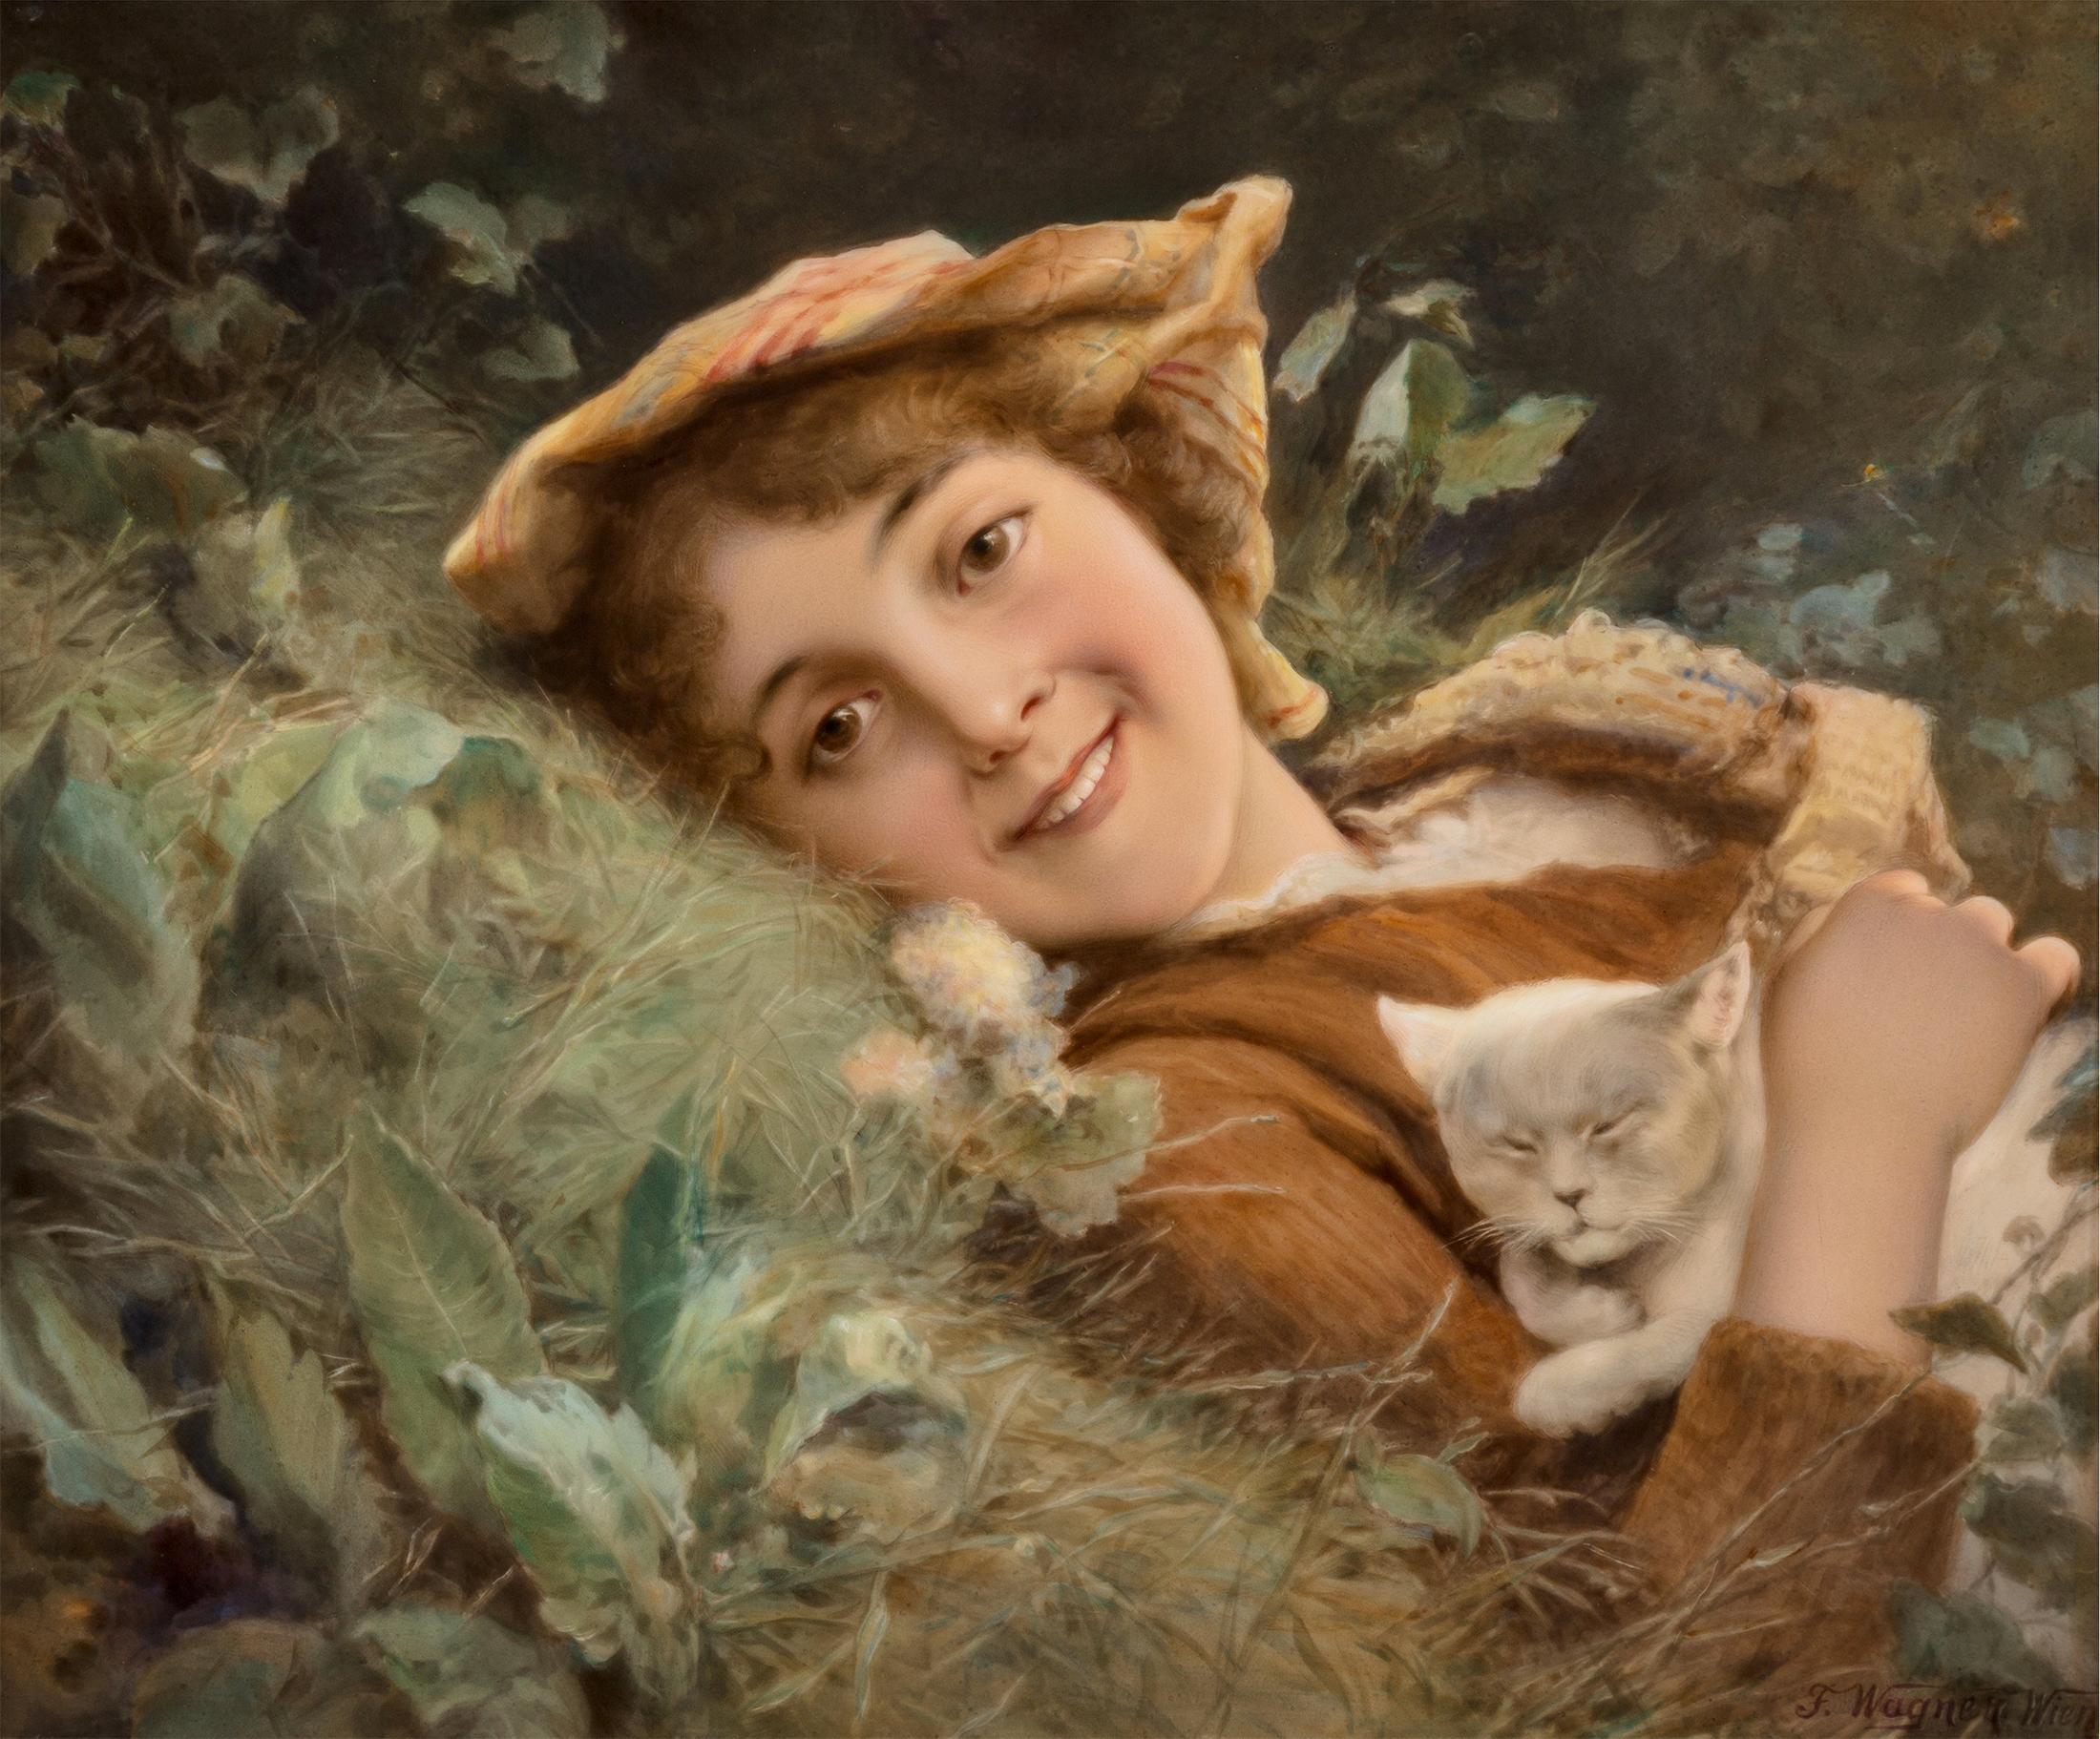 K.P.M. Porcelain Plaque Depicting a Portrait of a Young Girl and Kitten - Painting by Fritz Wagner